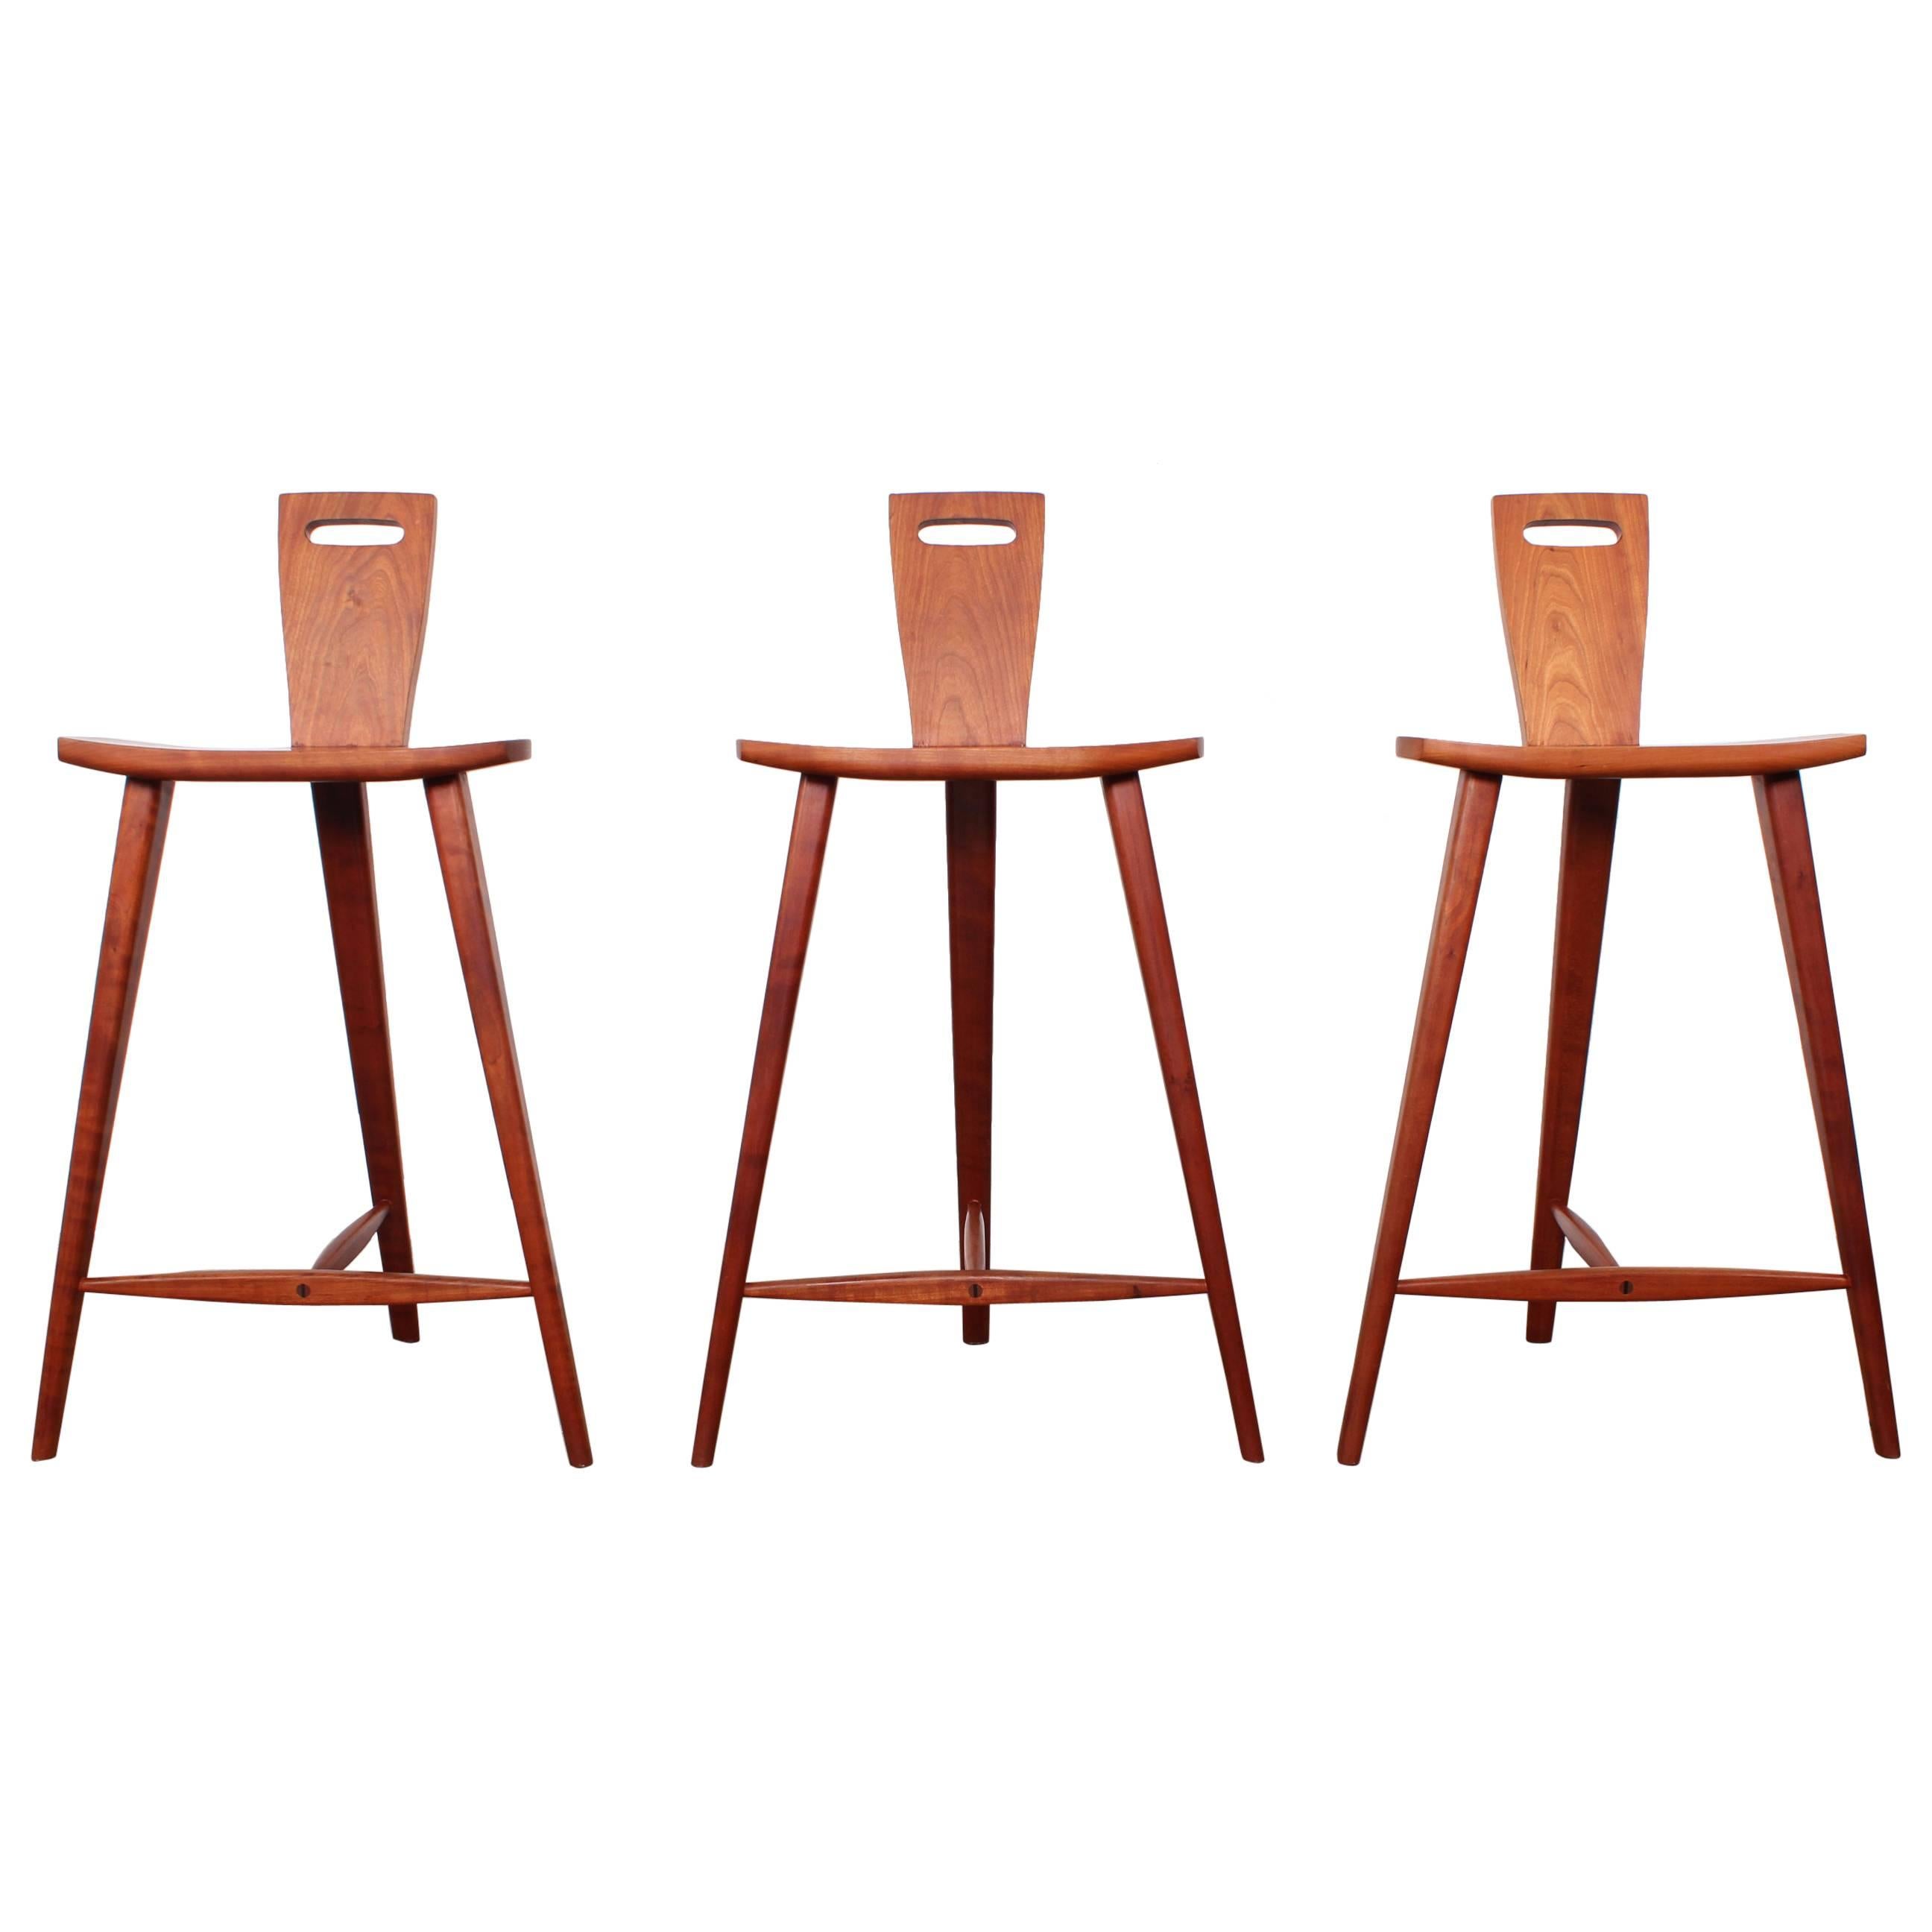 Three Barstools in the style of Tage Frid